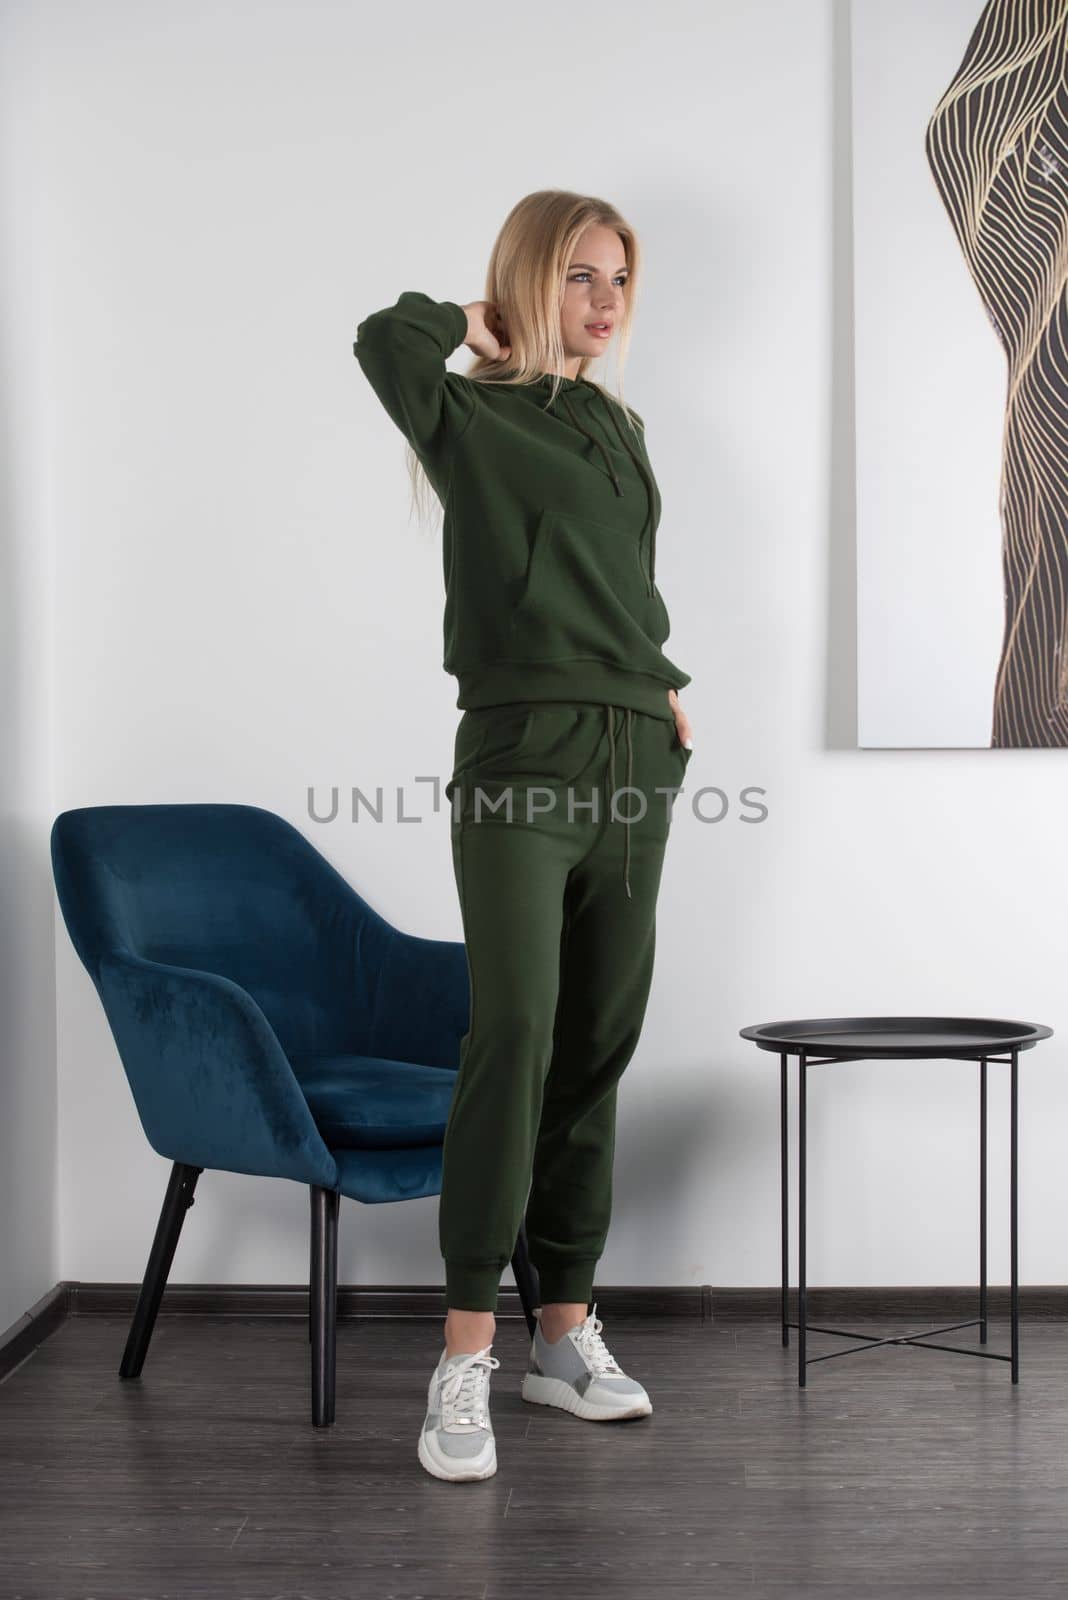 Stylish beautiful young blond woman in a green tracksuit poses near a white wall in the room. Attractive girl model posing near blue chair. Fitness lady